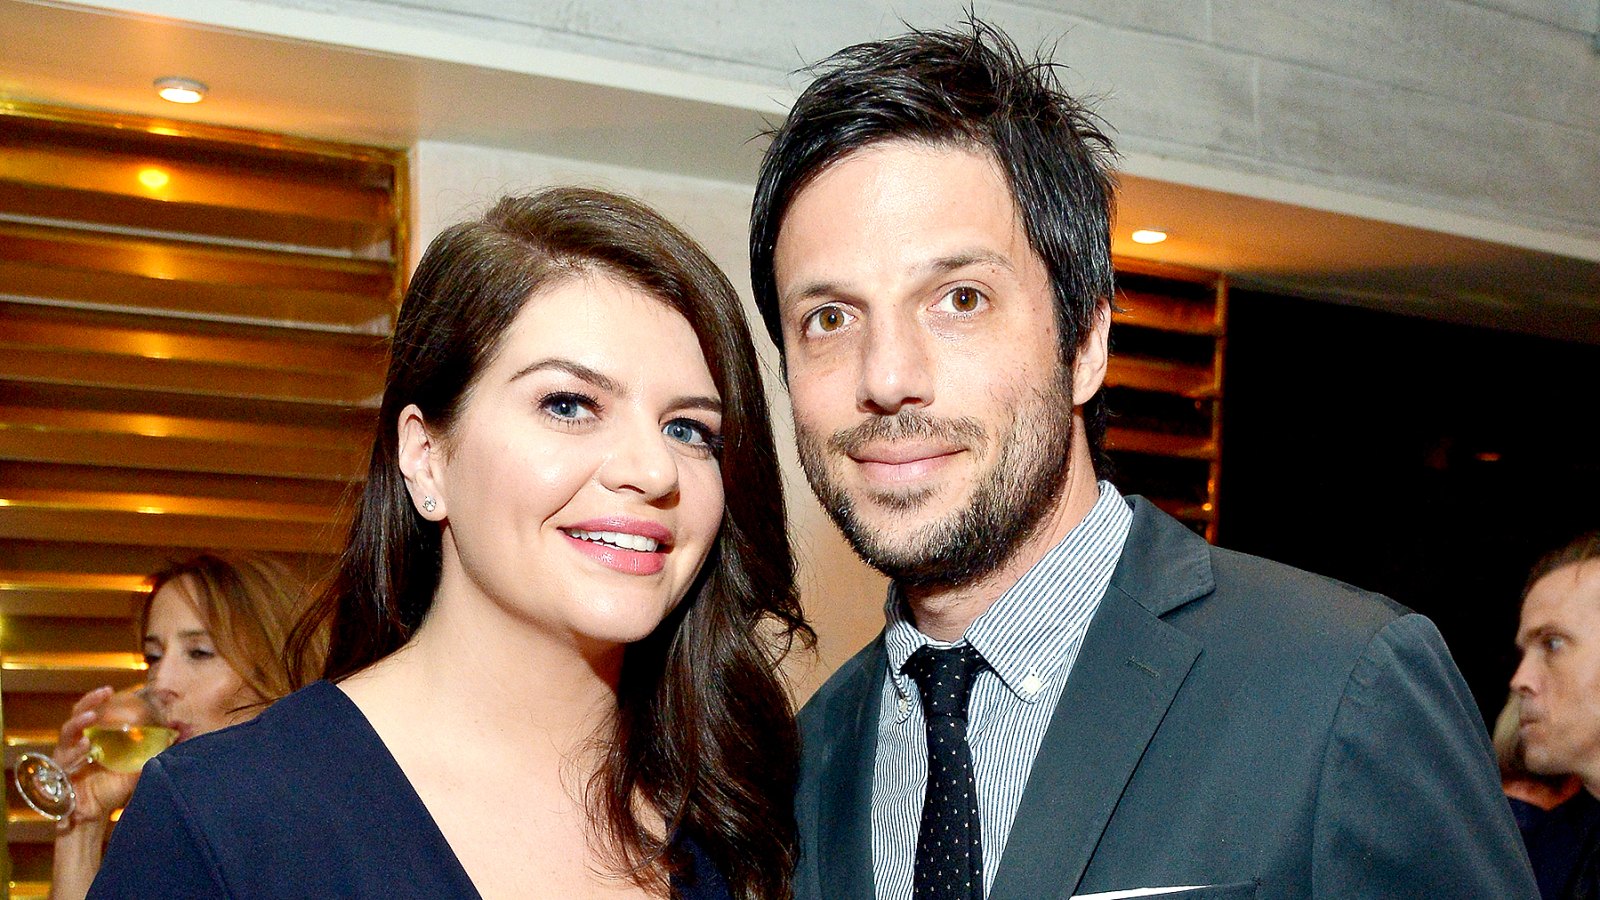 Casey Wilson and David Caspe attend the premiere of Amazon's new series "One Mississippi" on August 30, 2016 in Los Angeles, California.